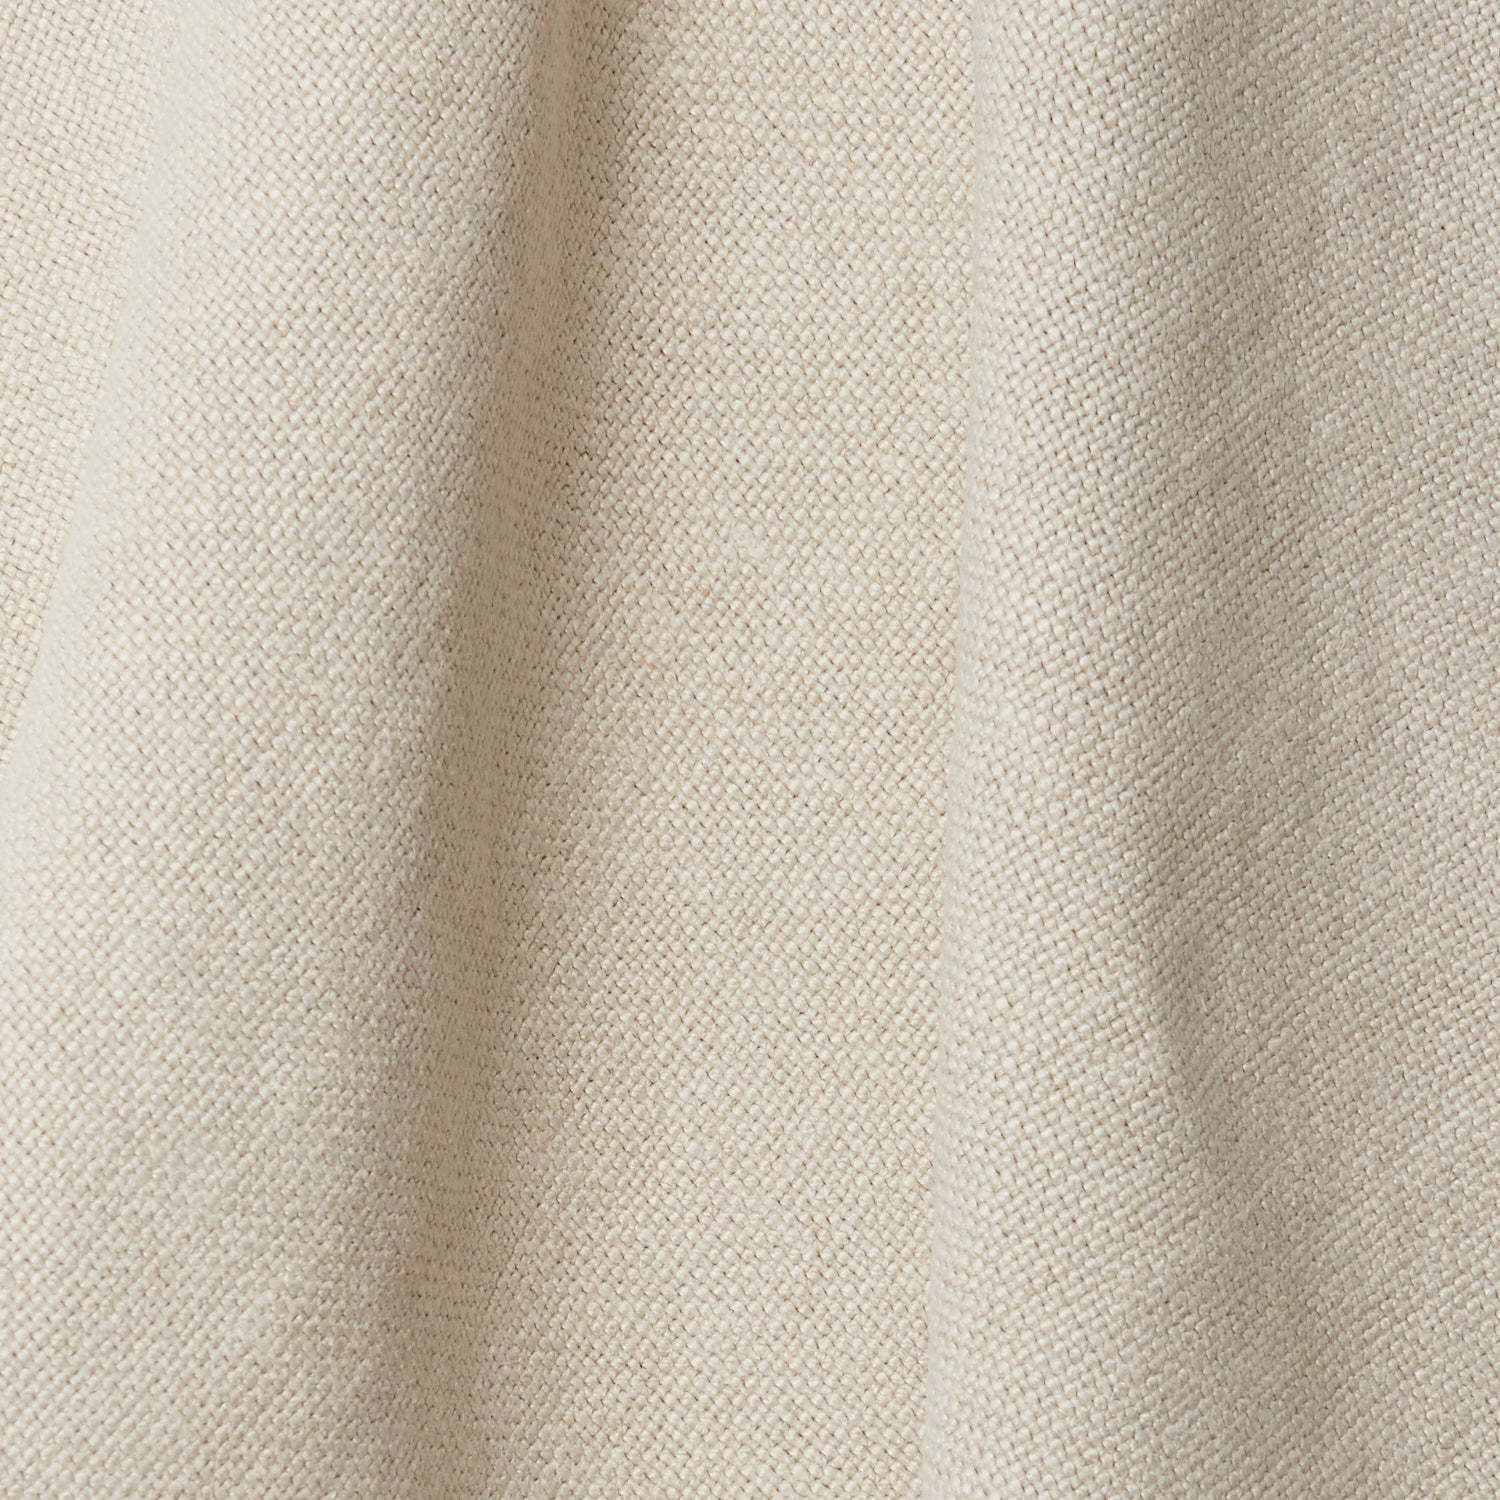 A draped swatch of old-world linen fabric in a solid cream color.